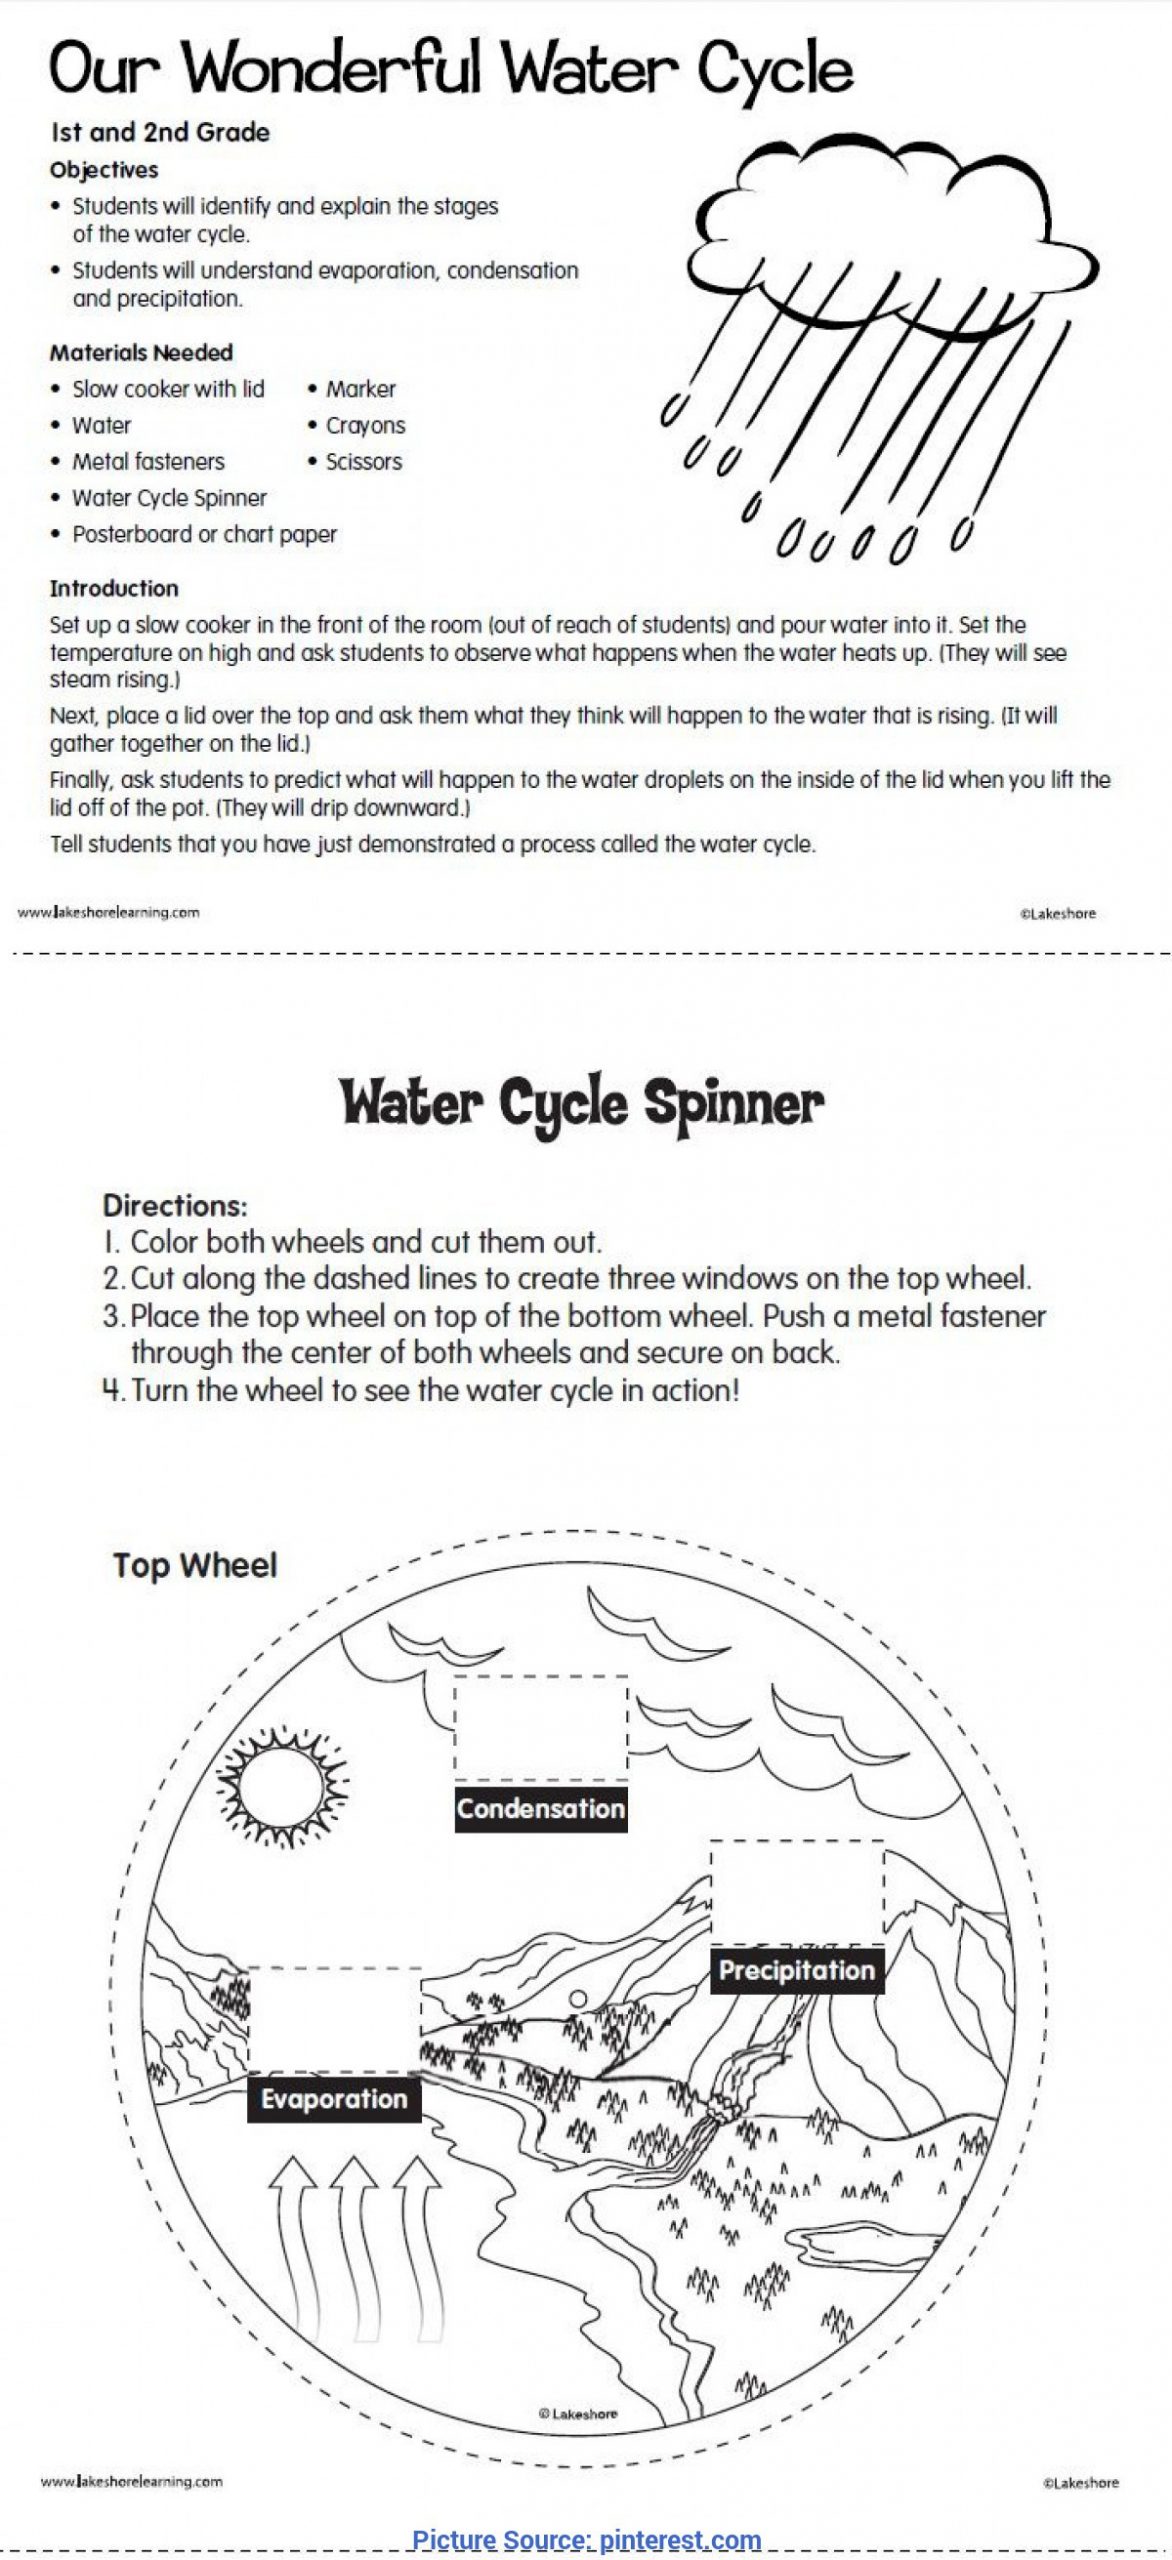 Water Cycle Worksheet Middle School Typical 2nd Grade Lesson Plans Water Cycle 357 Best Water